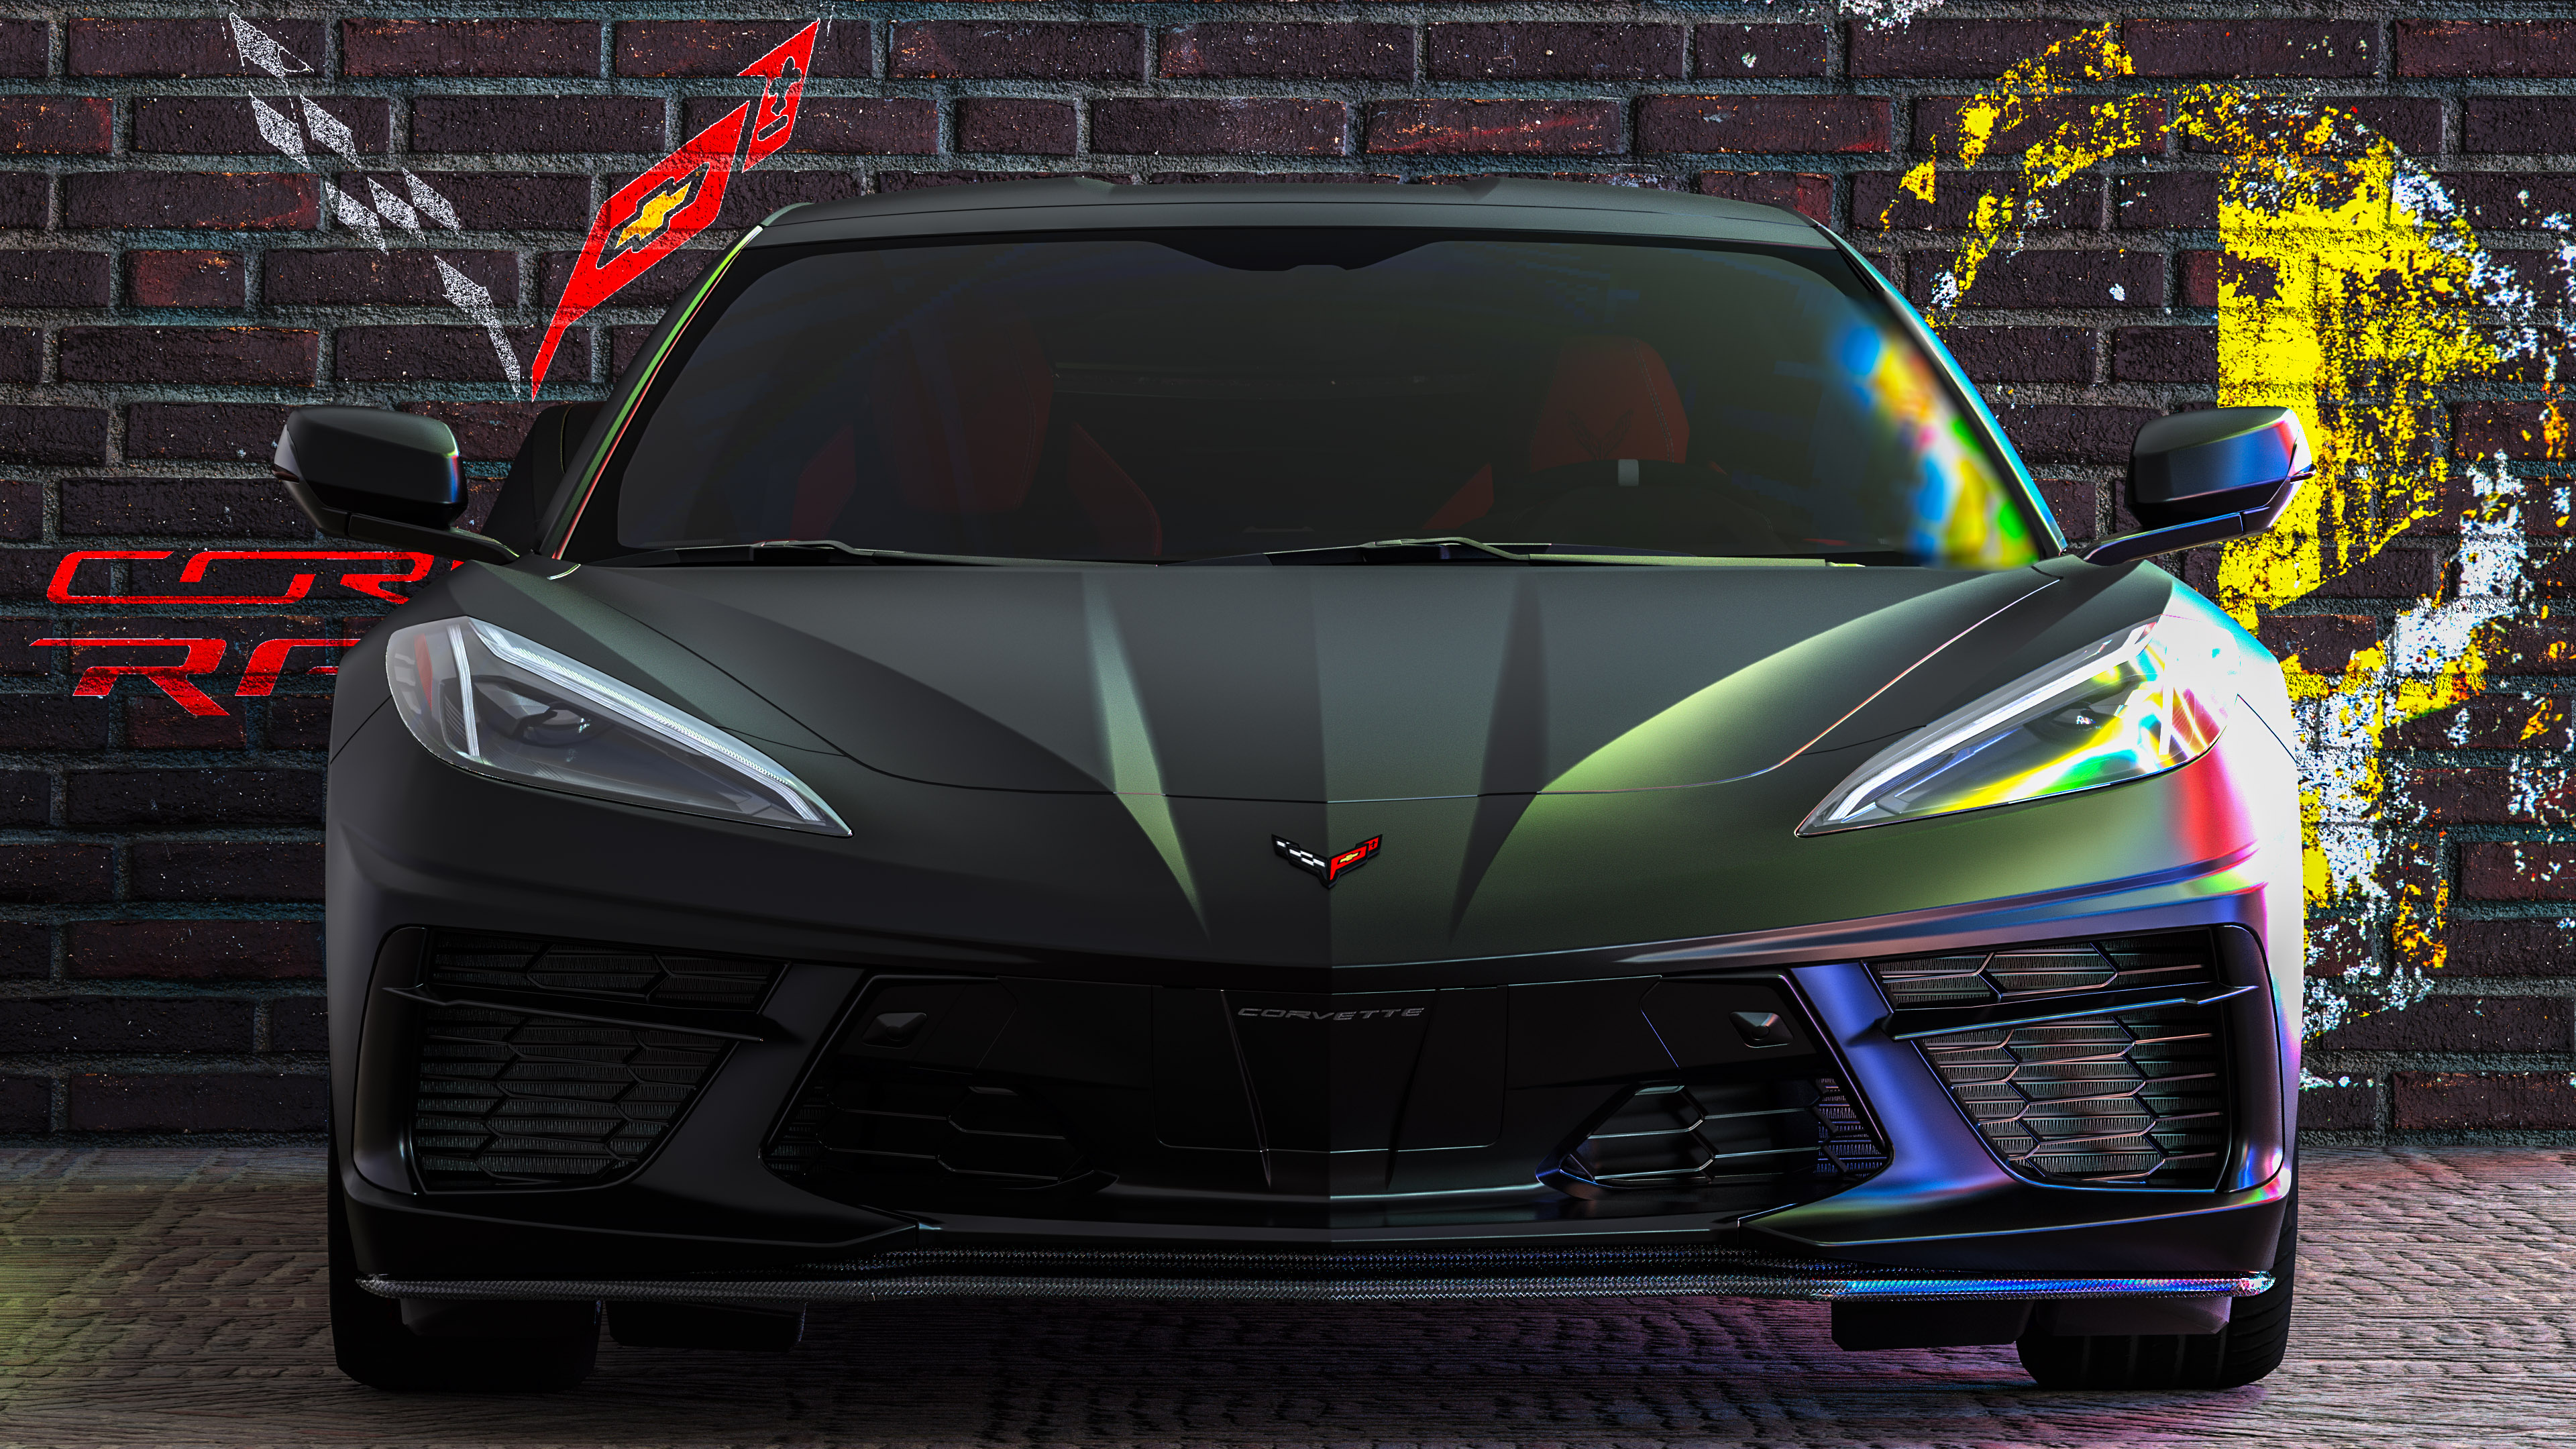 Transform your device's visual appeal with the cool car wallpaper featuring Chevrolet Corvette C8, capturing the essence of muscle car style.